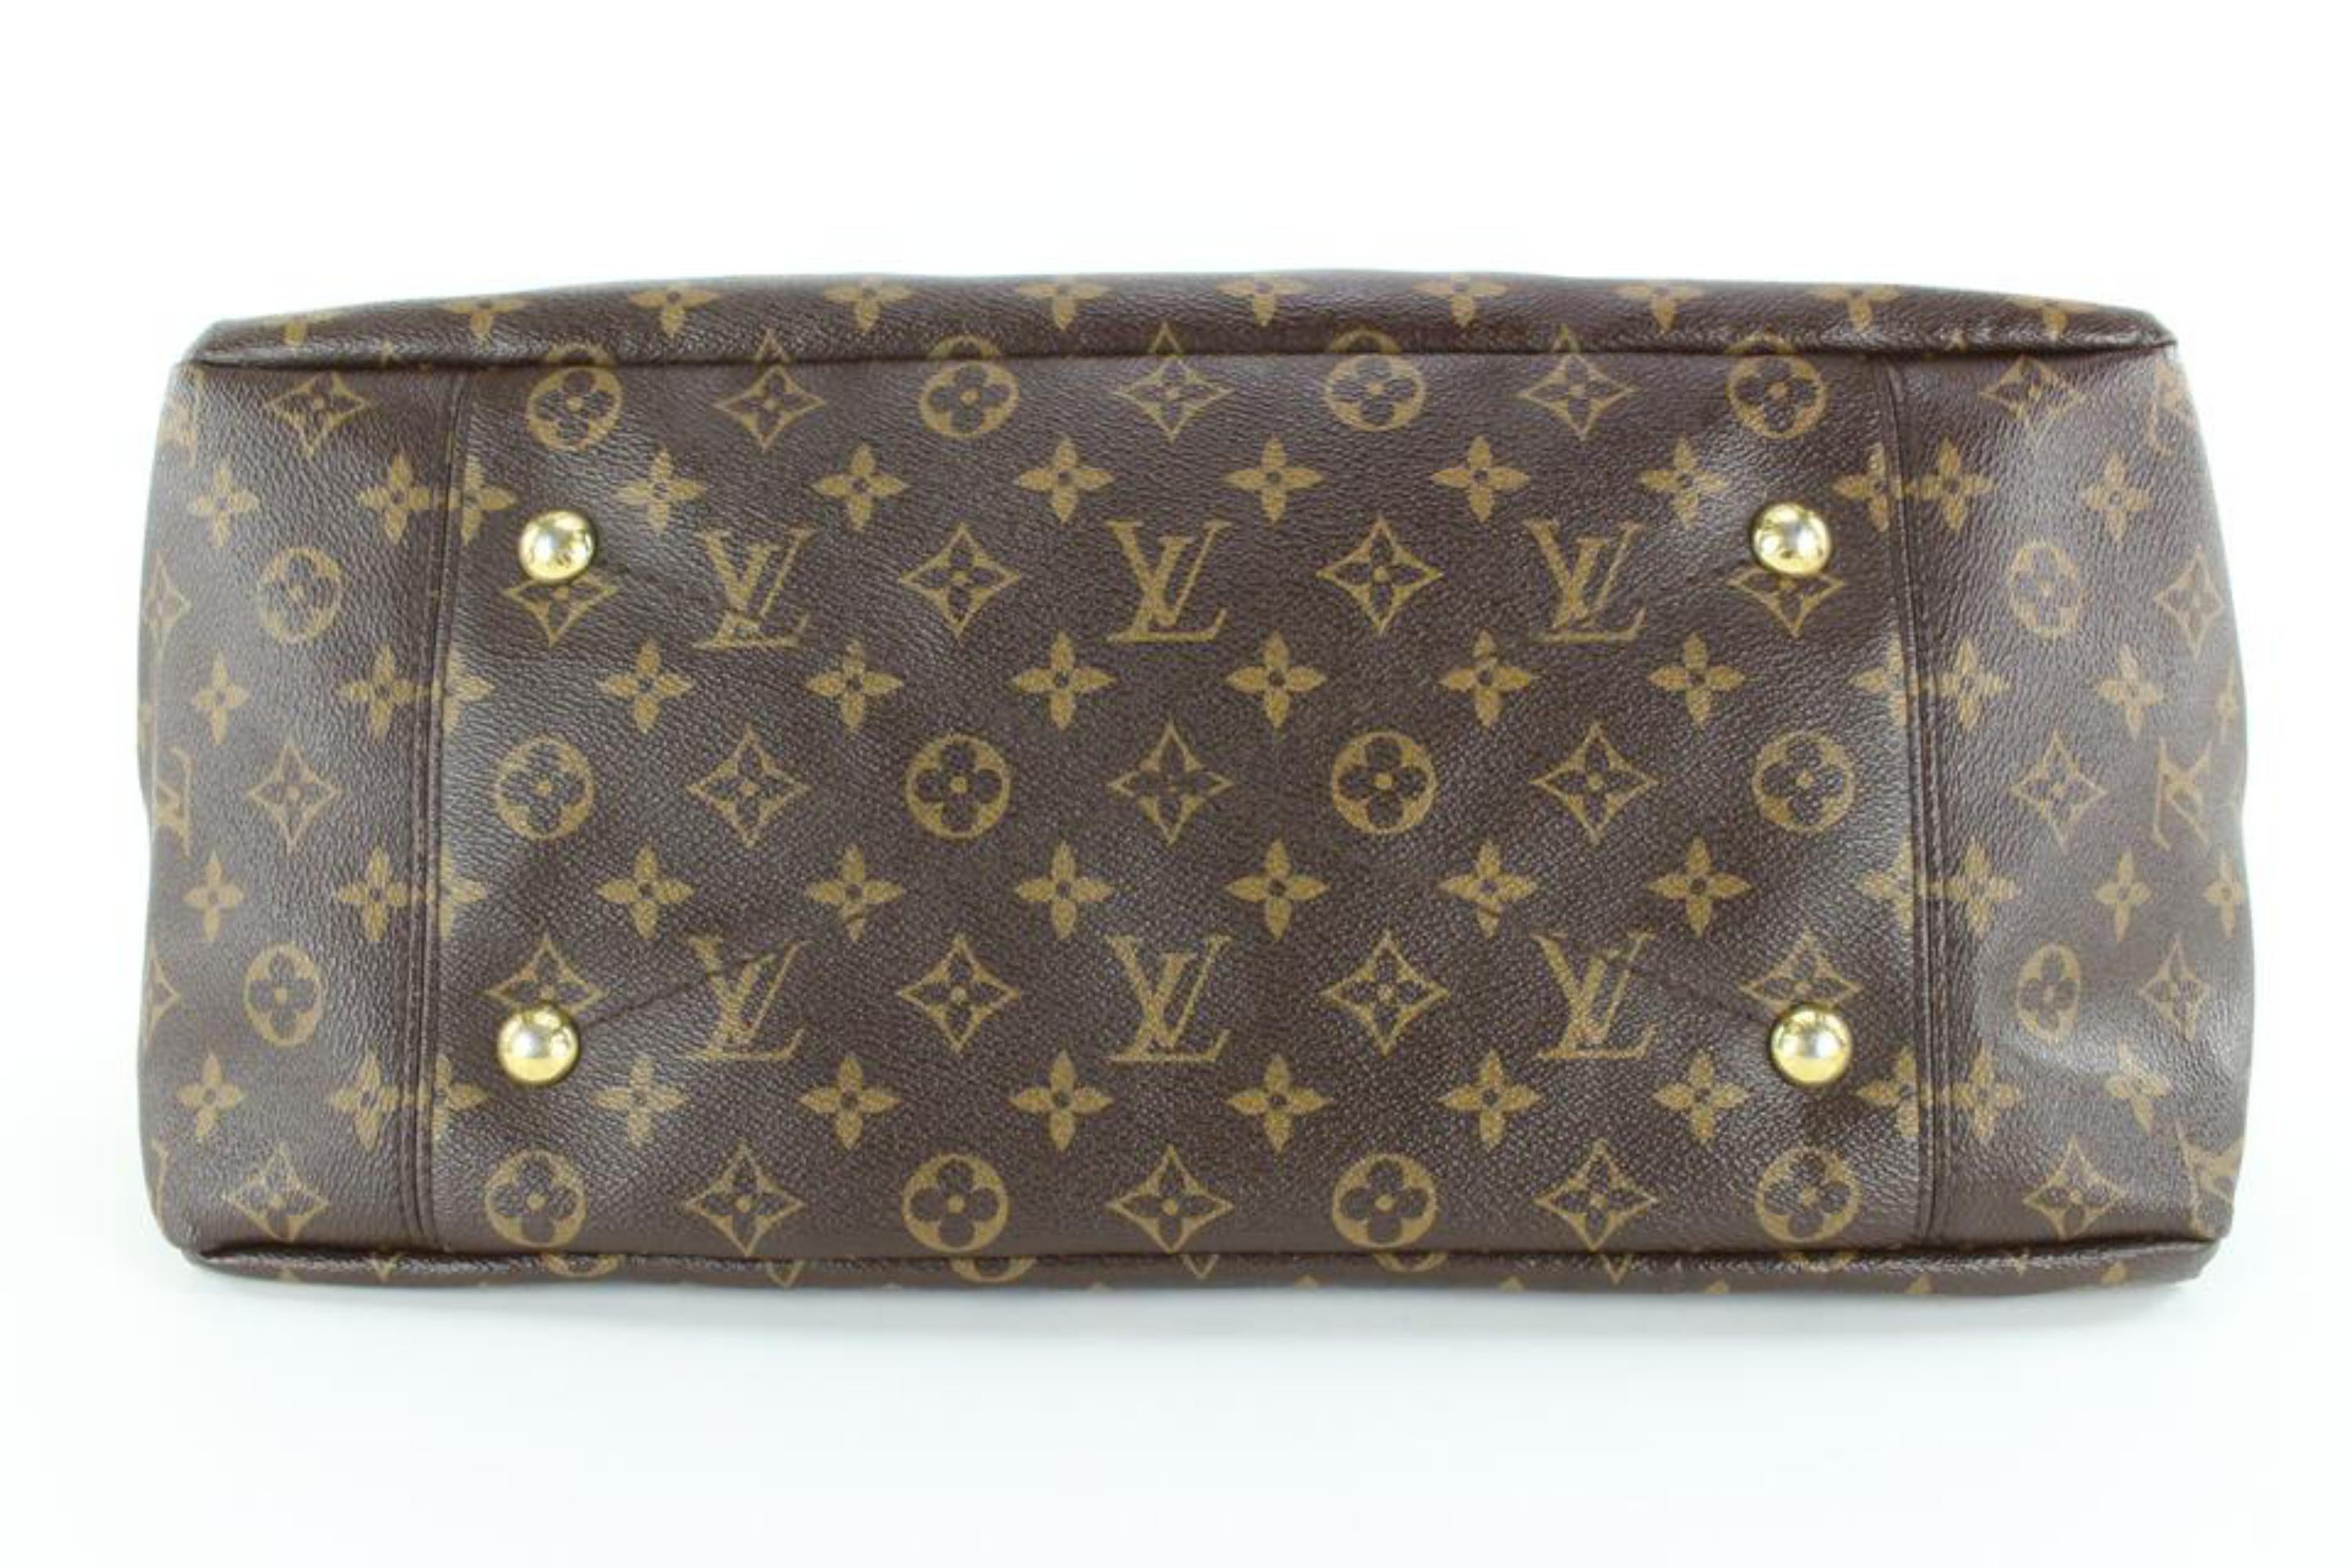 Louis Vuitton Artsy Bag Reference Guide - Spotted Fashion